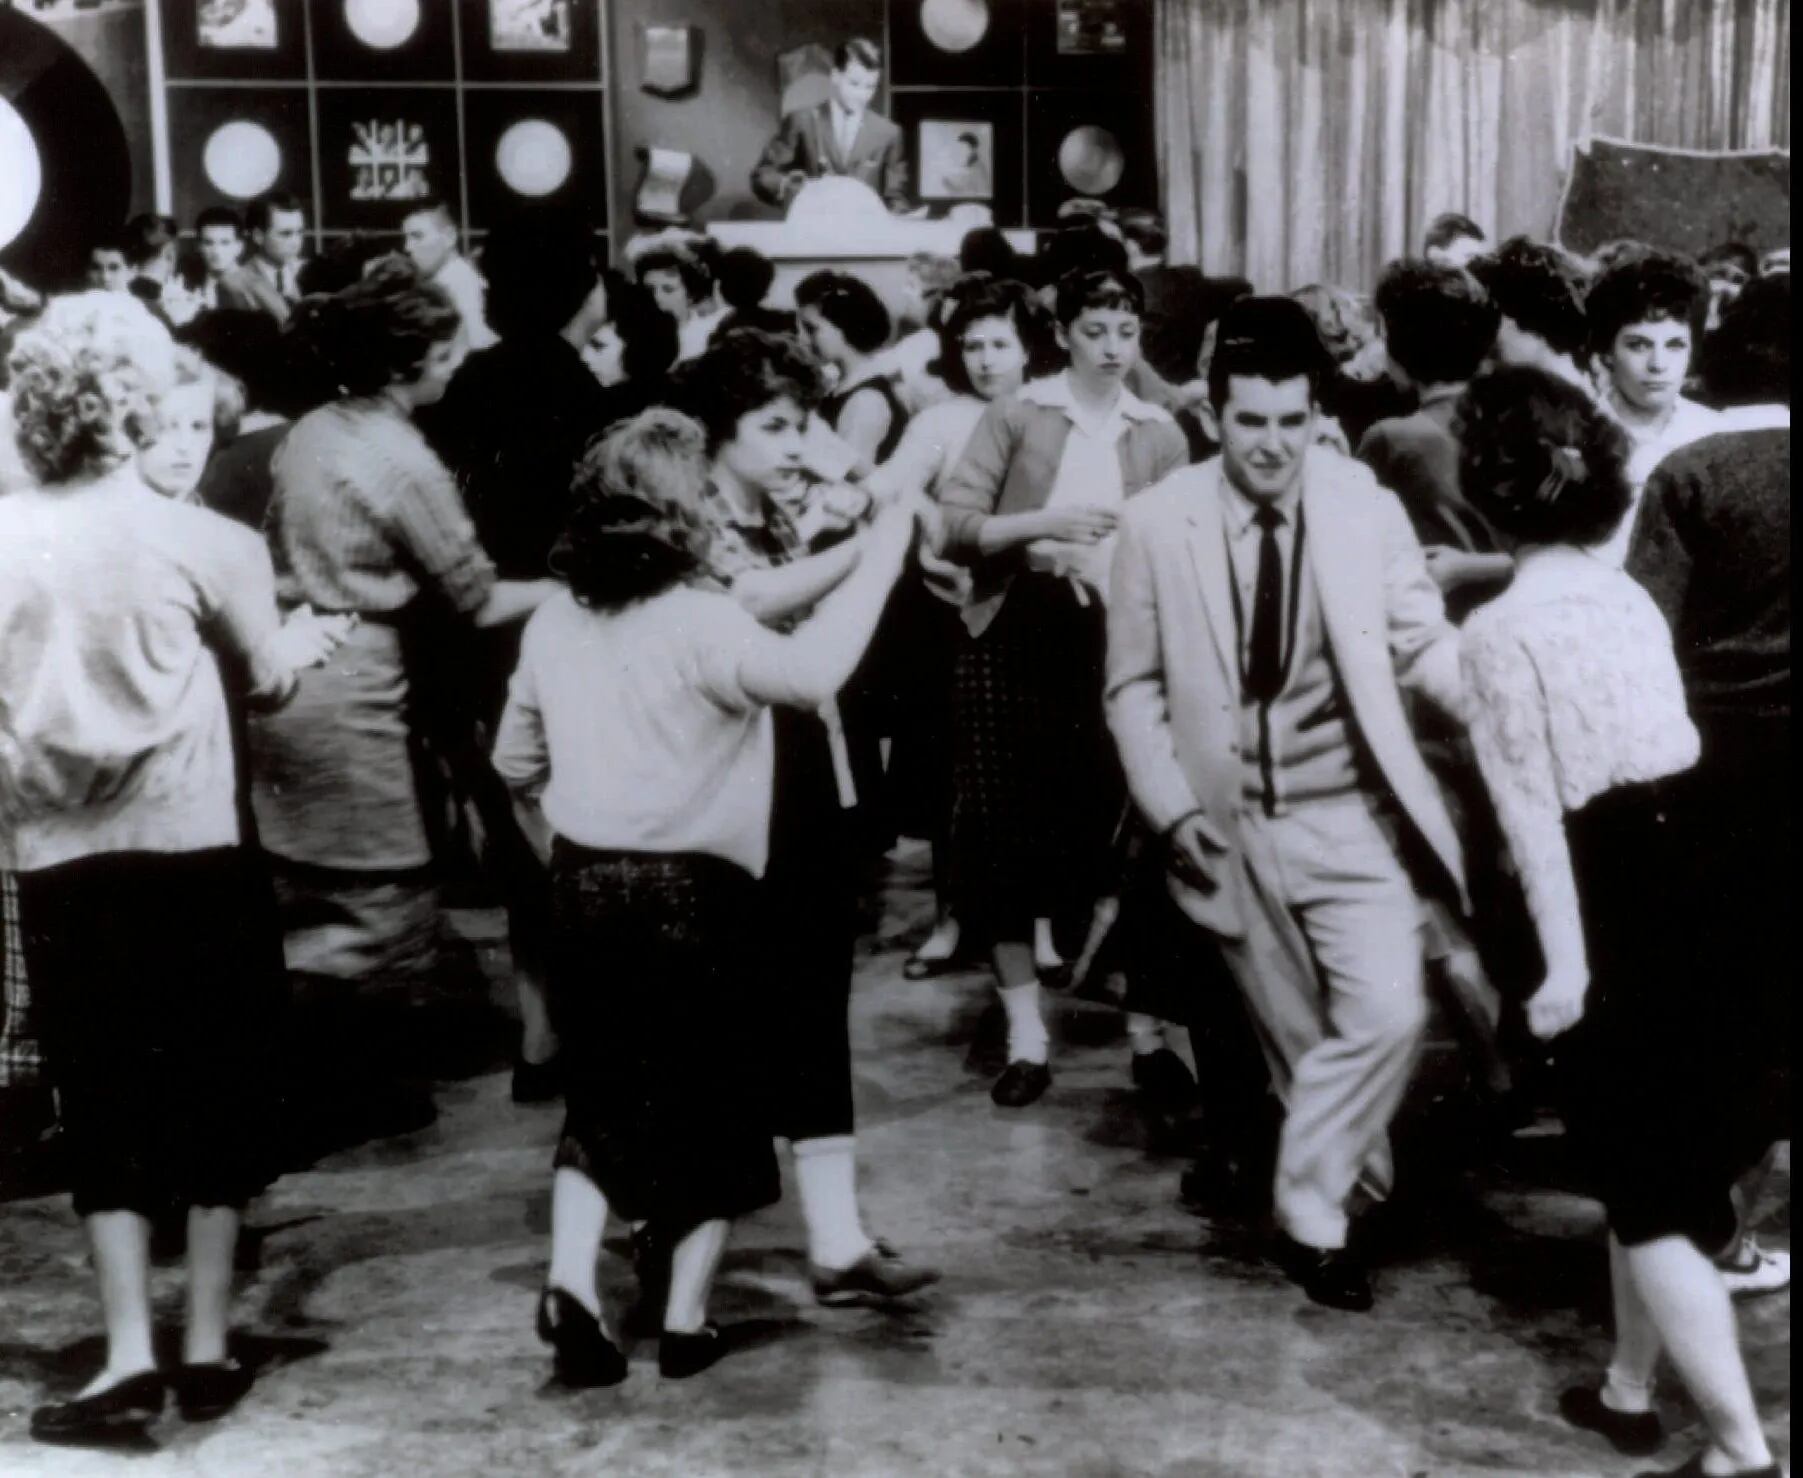 New book links American teen culture of 50s/60s to local televised dance  programs